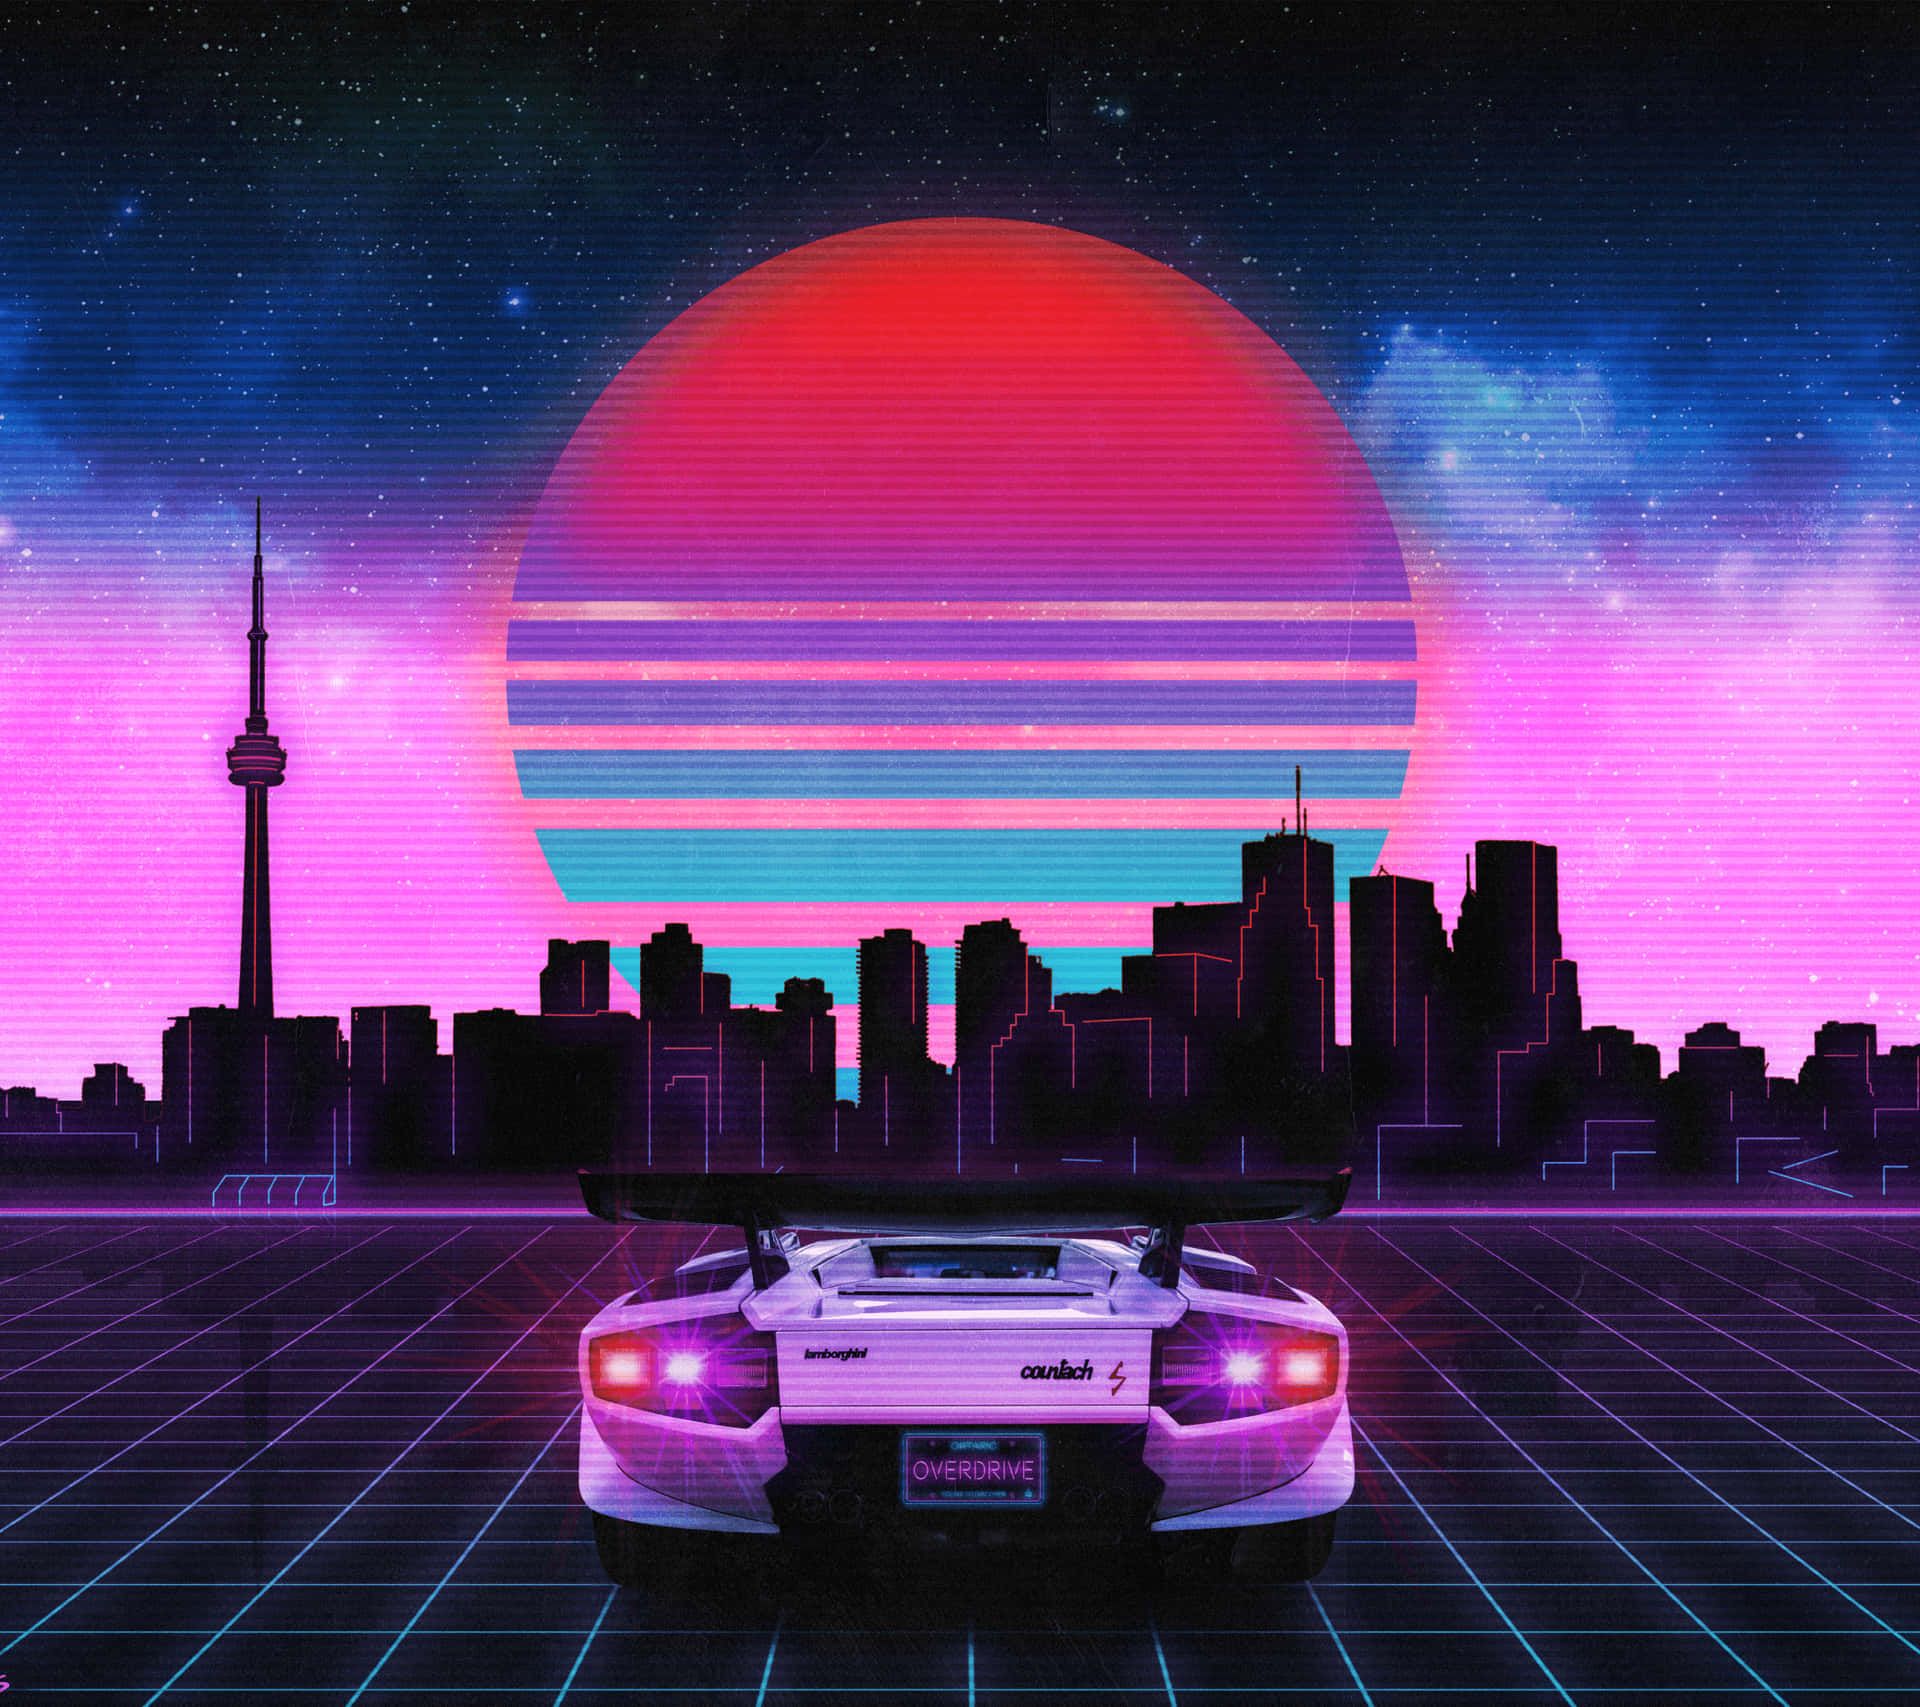 “Let the Future Begin - Retrowave Style”